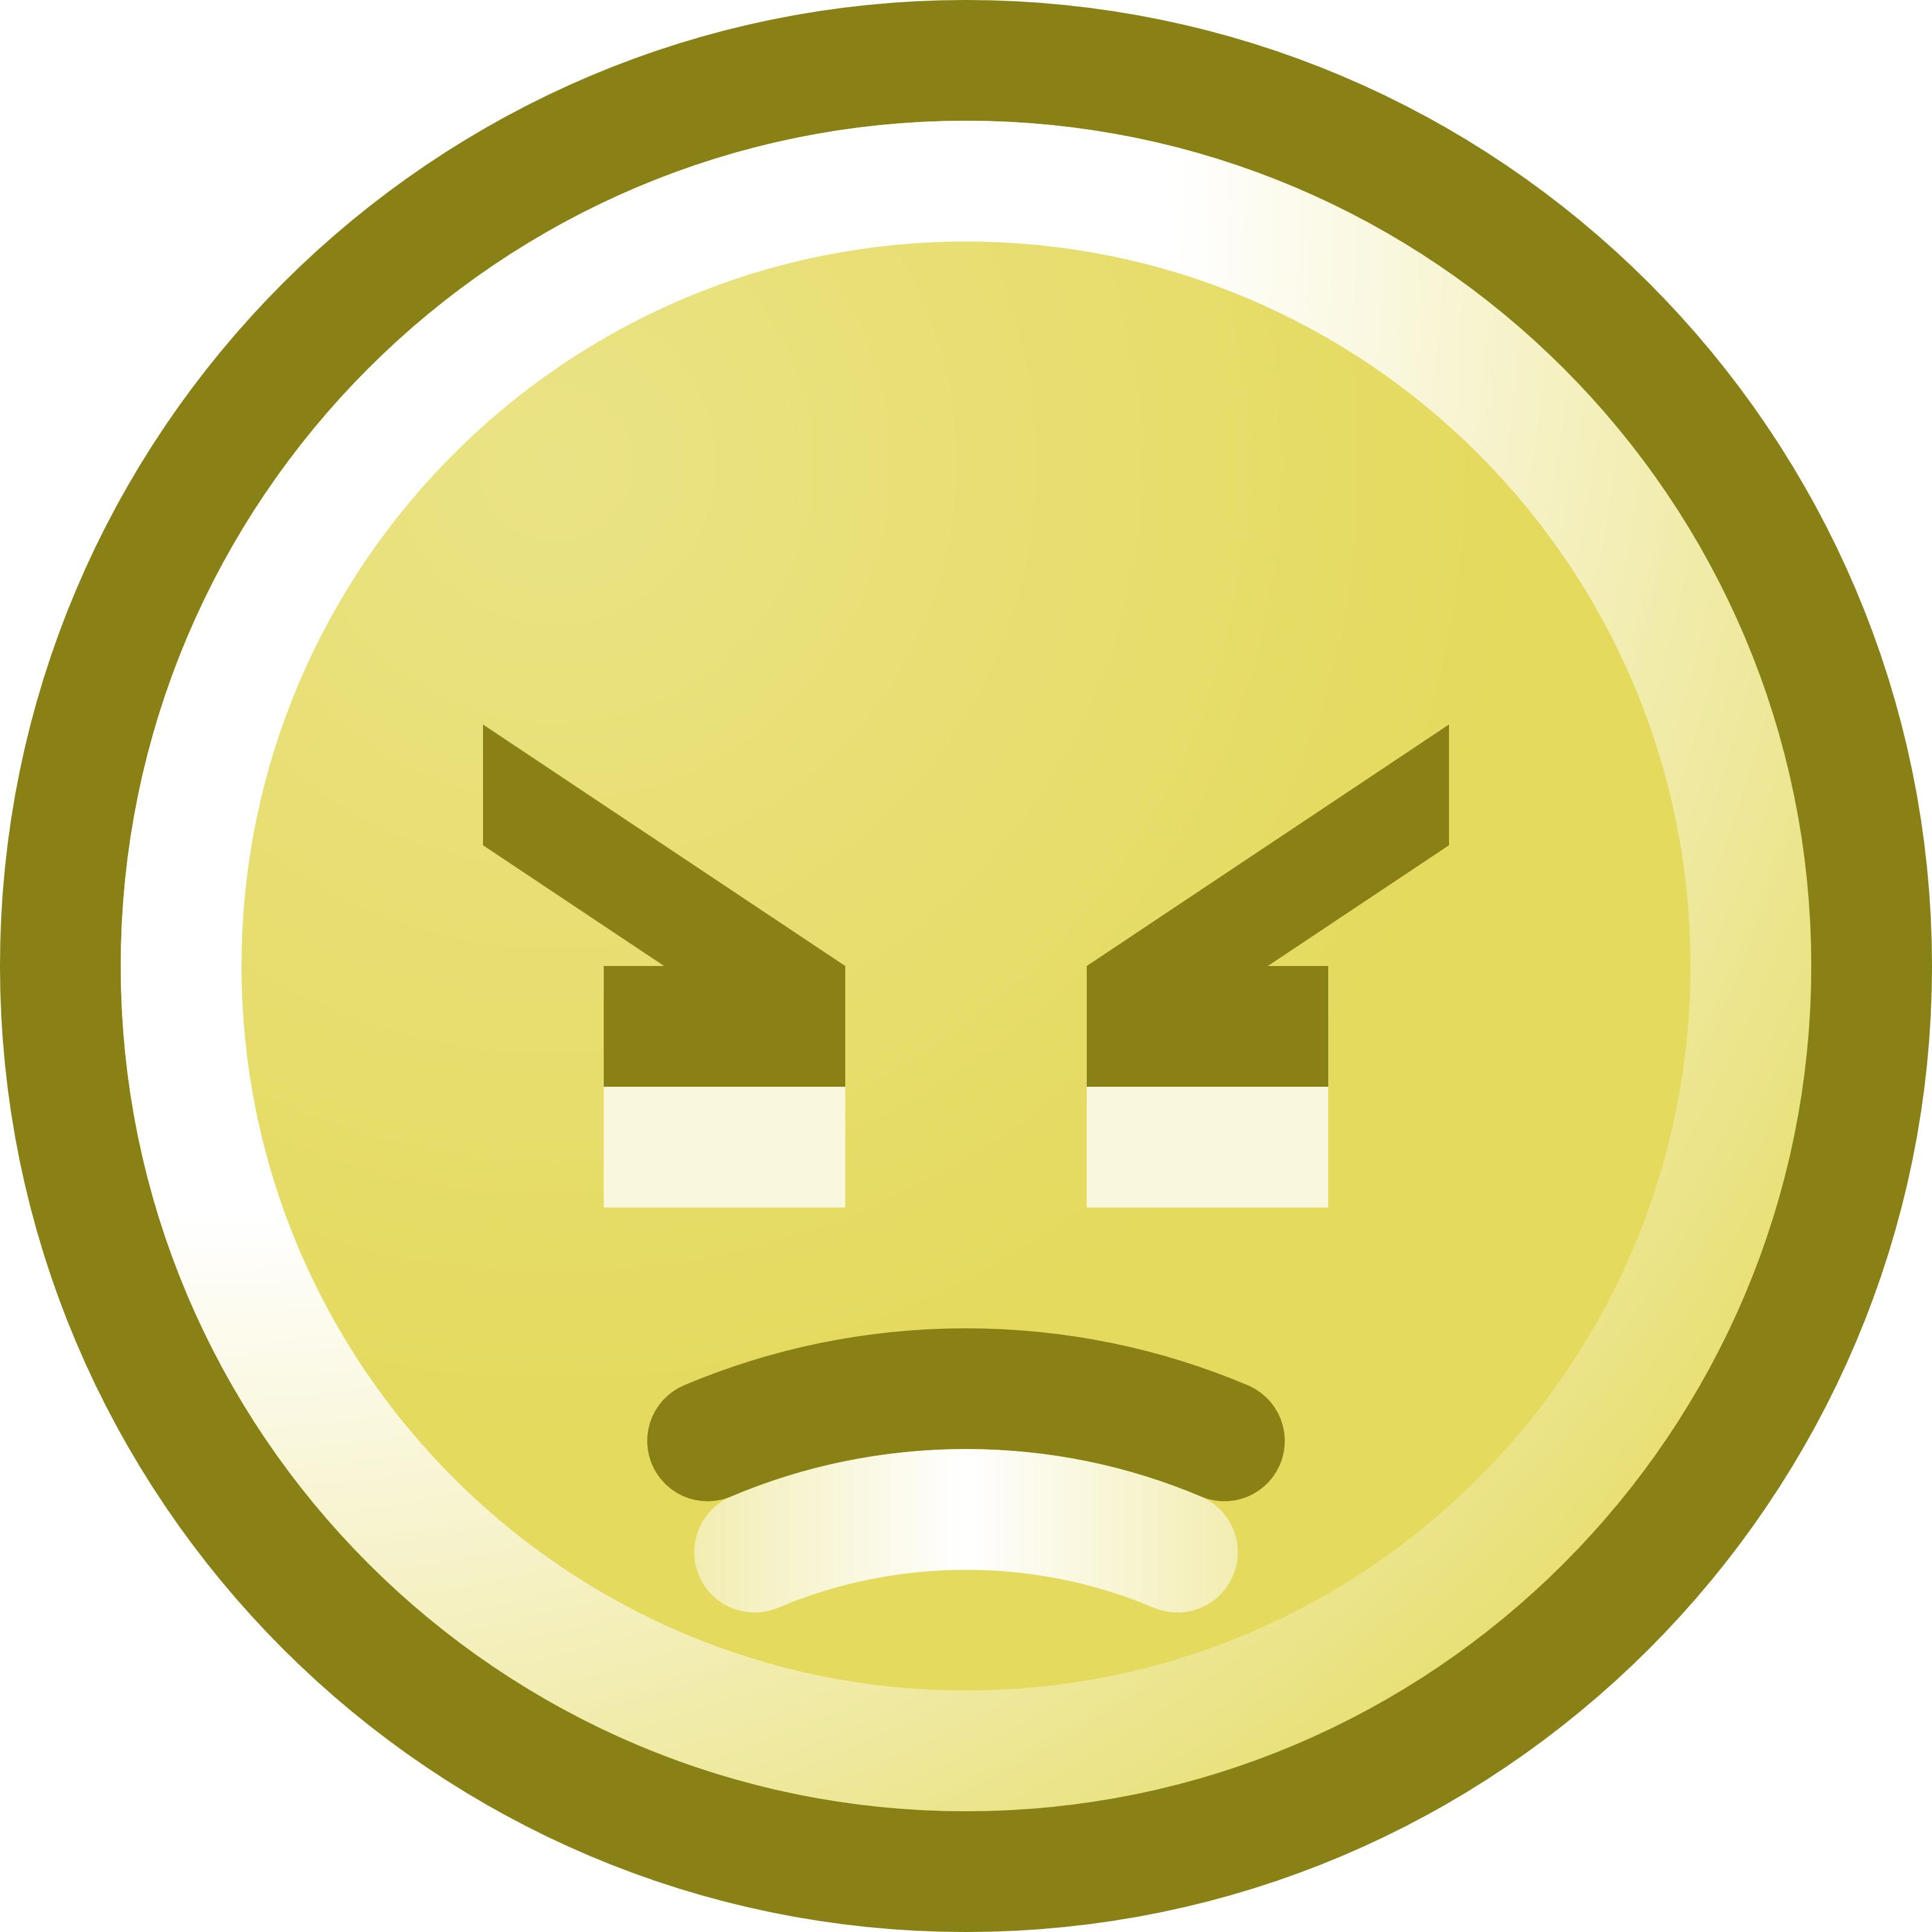 38+ Frustrated Smiley Face Clip Art